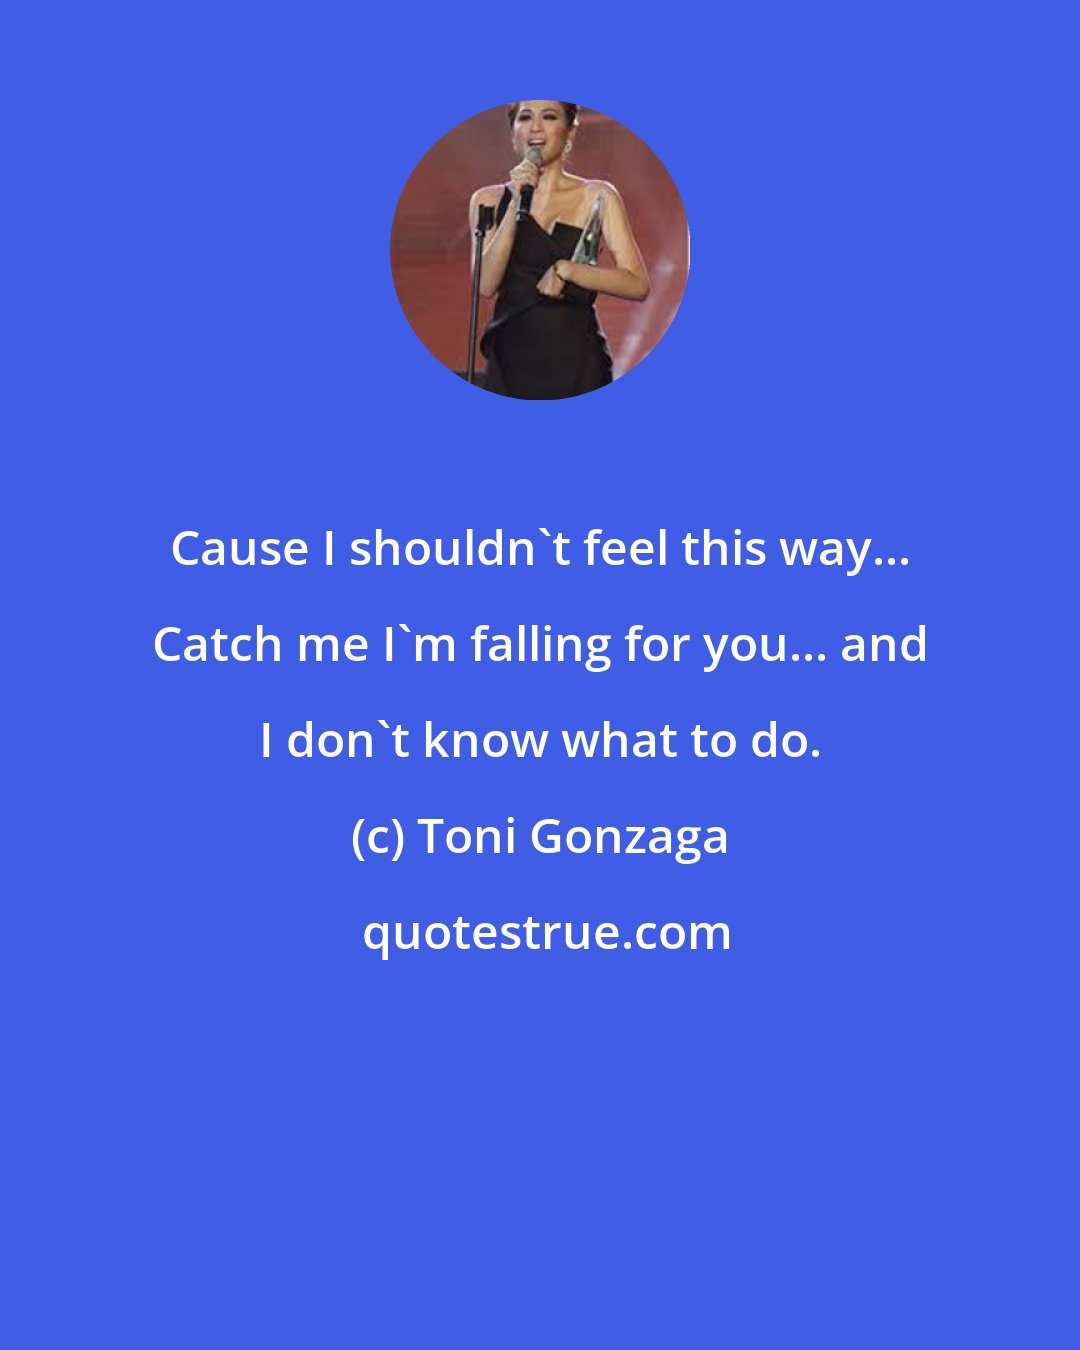 Toni Gonzaga: Cause I shouldn't feel this way... Catch me I'm falling for you... and I don't know what to do.